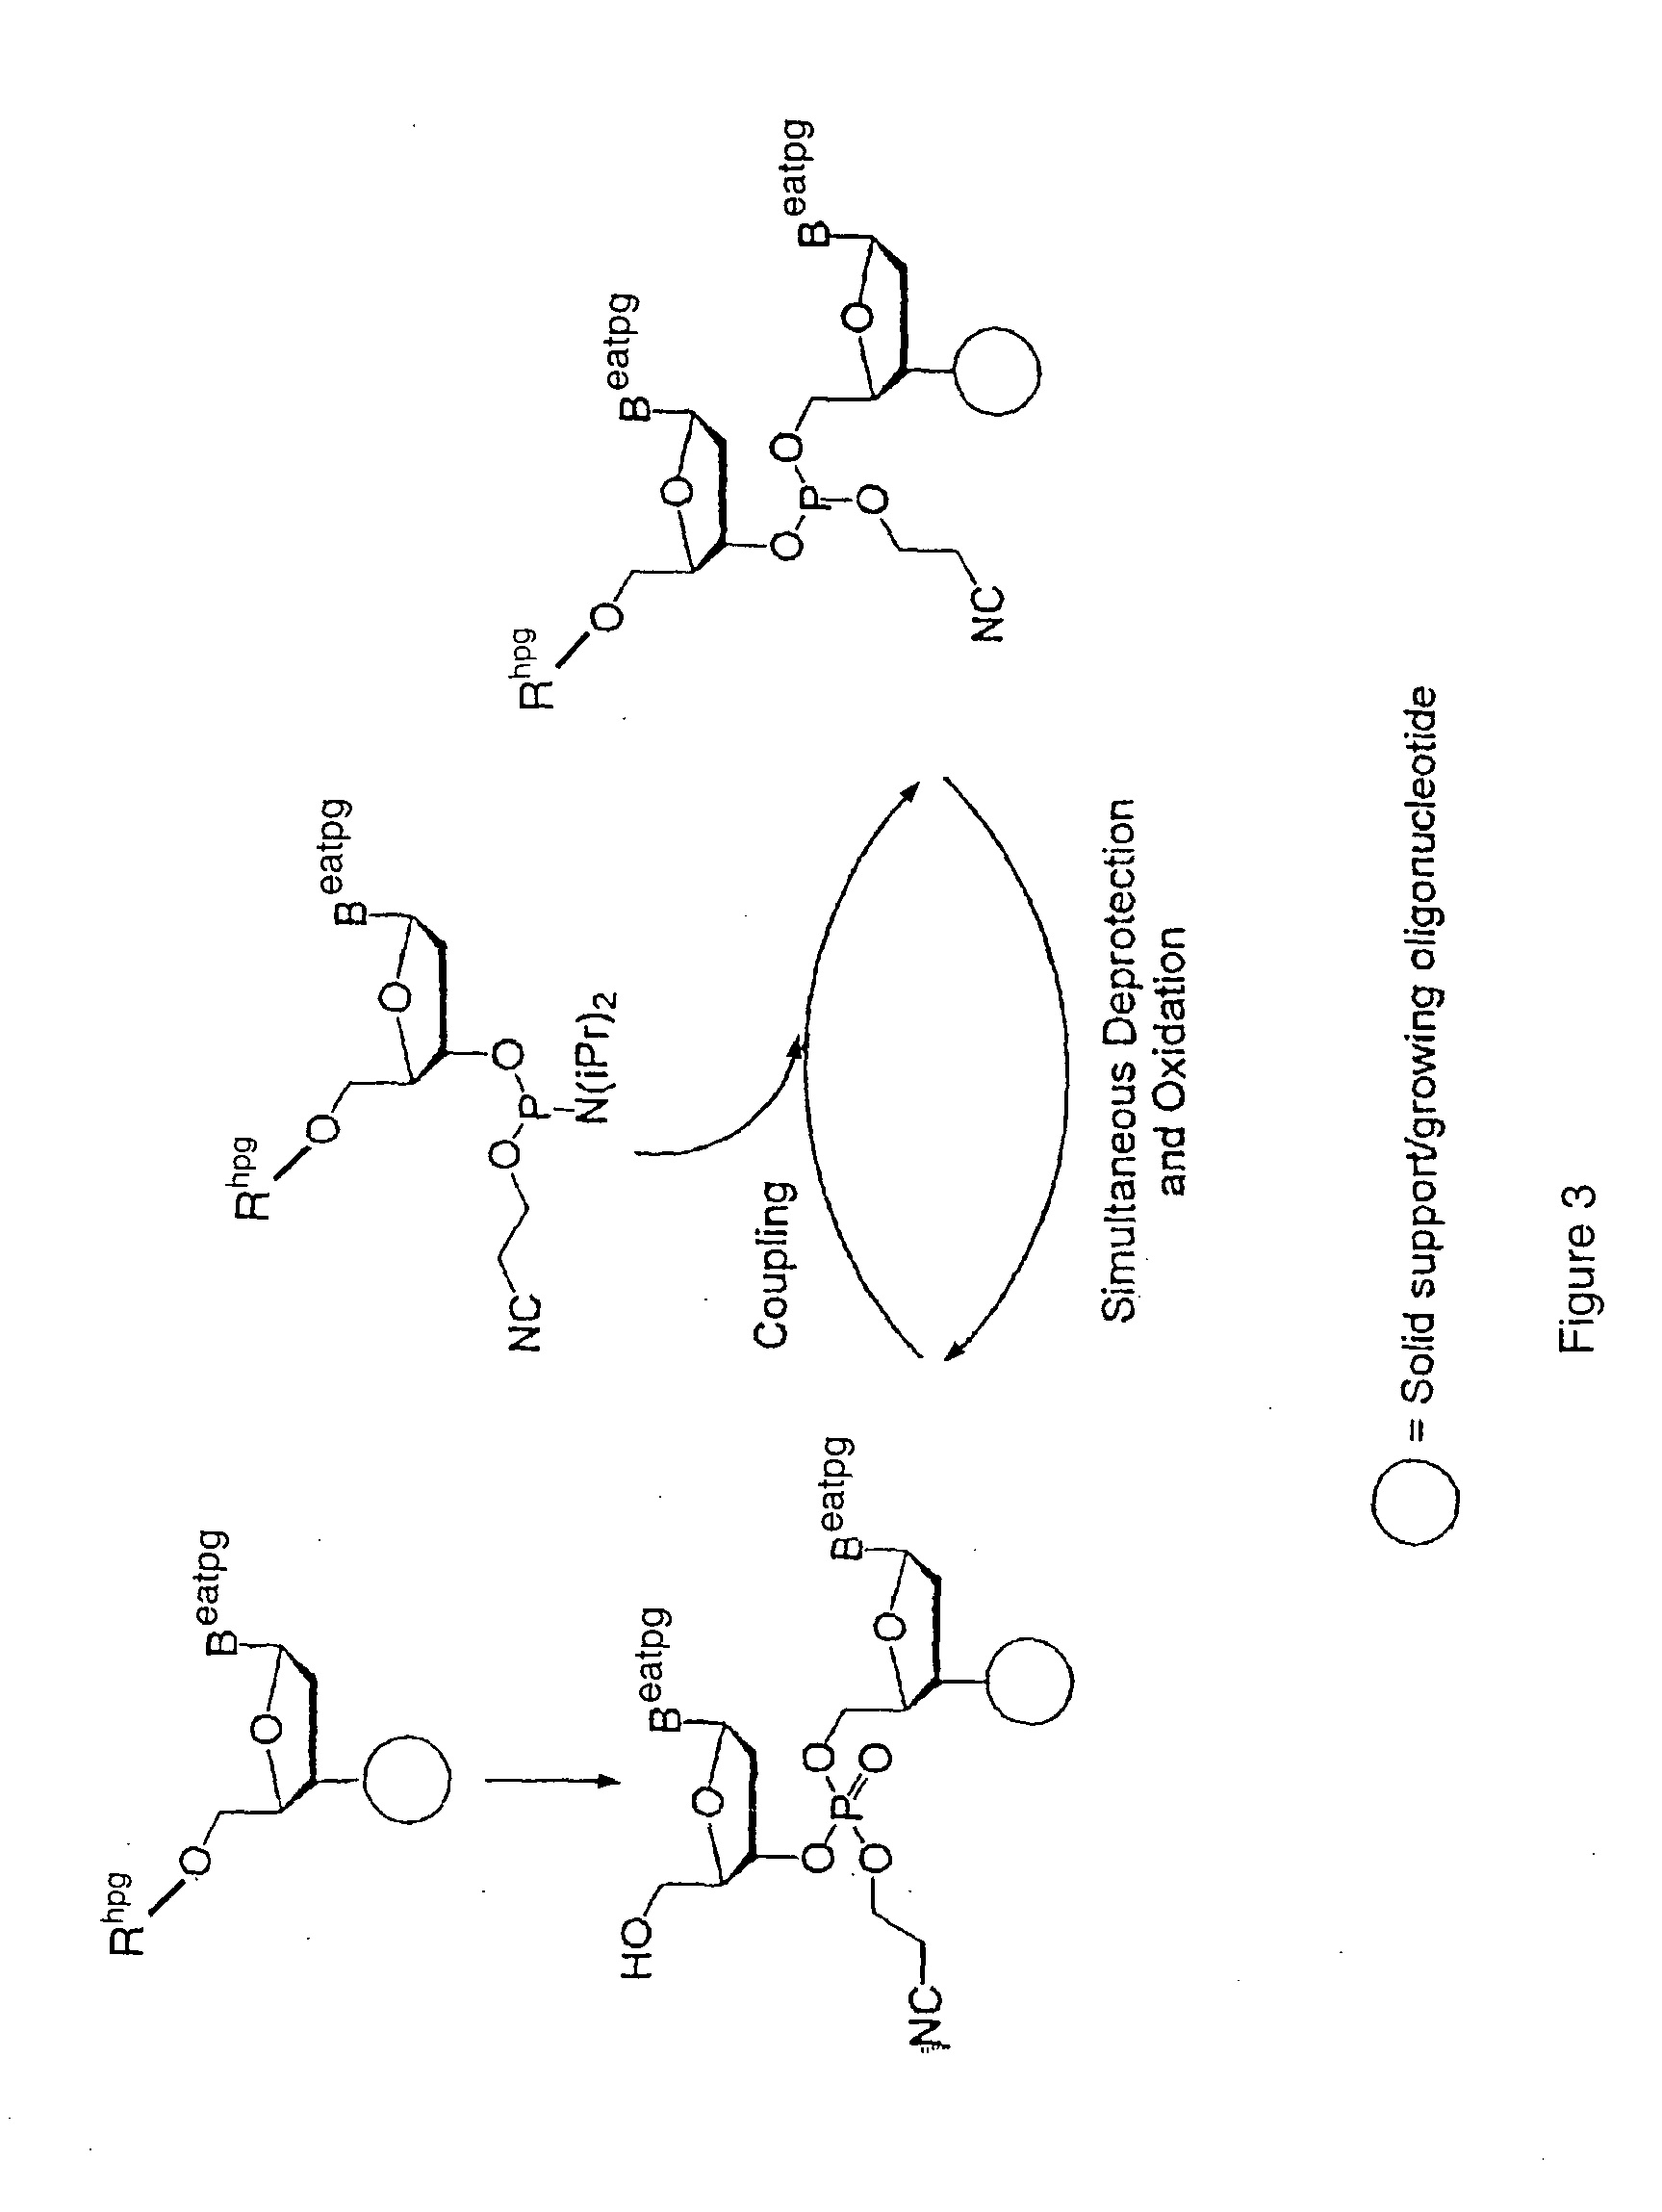 Precursors for two-step polynucleotide synthesis